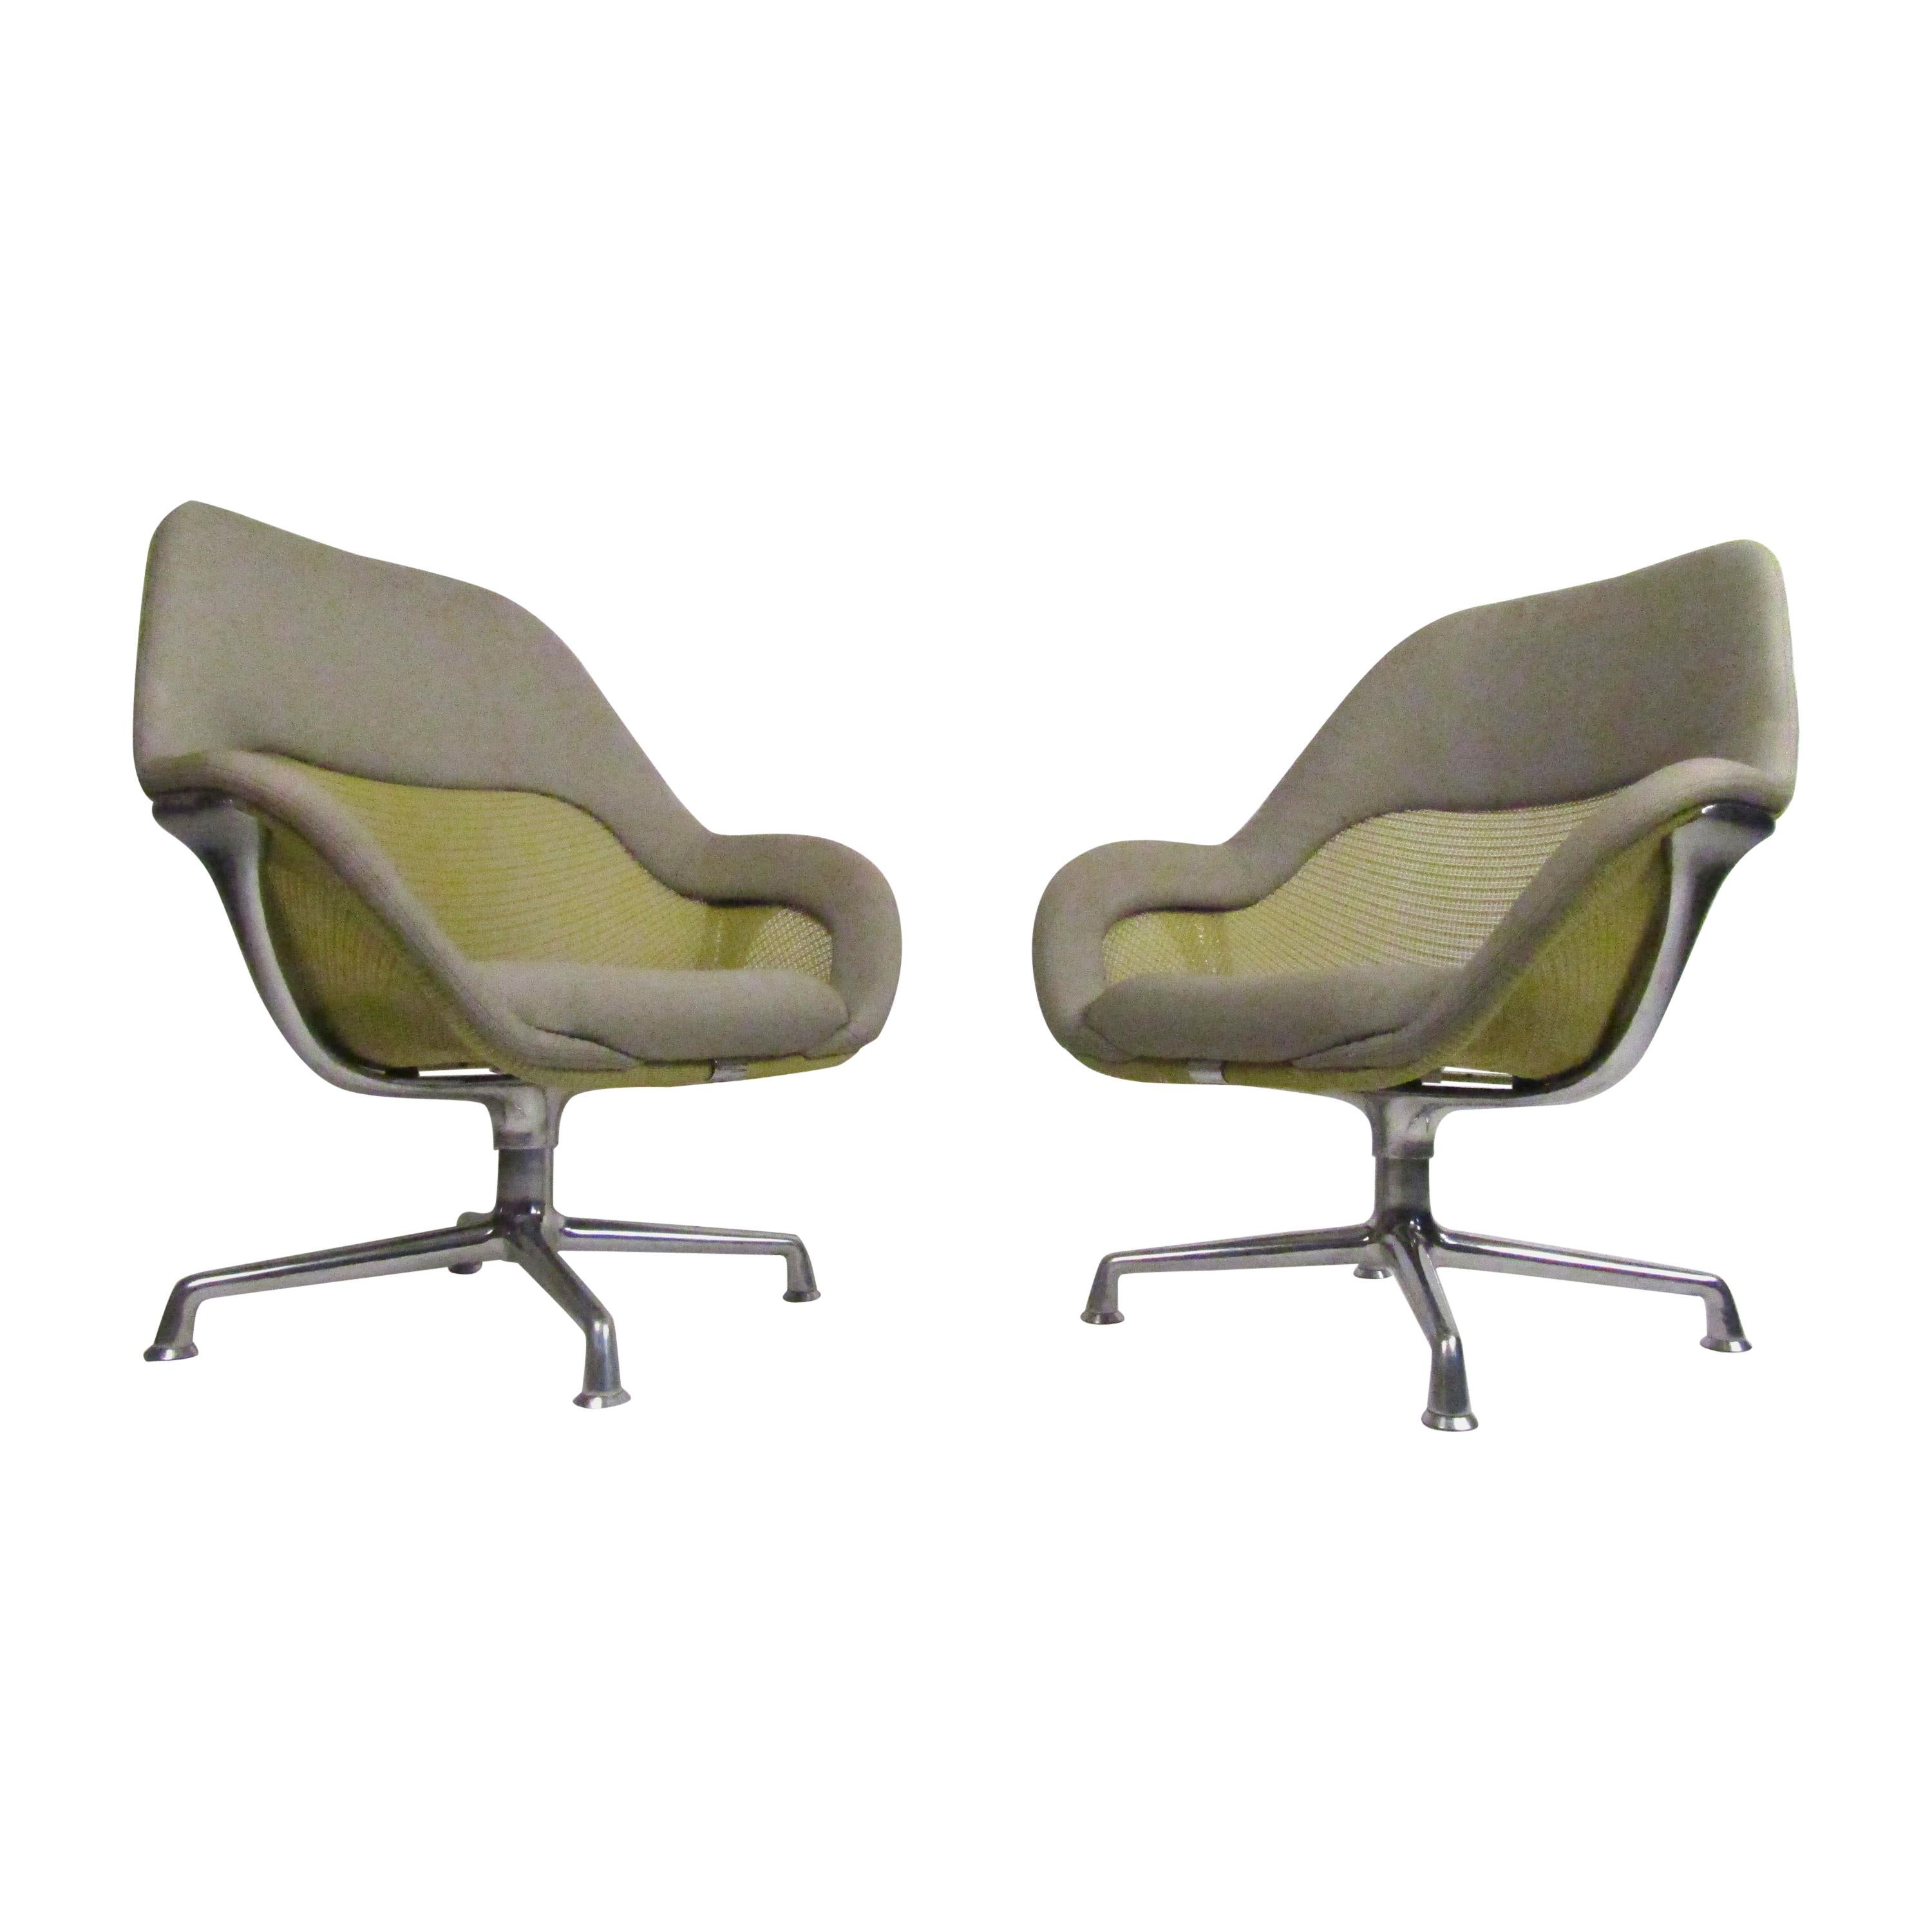 Pair of Swiveling Conference Chairs by Coalesse